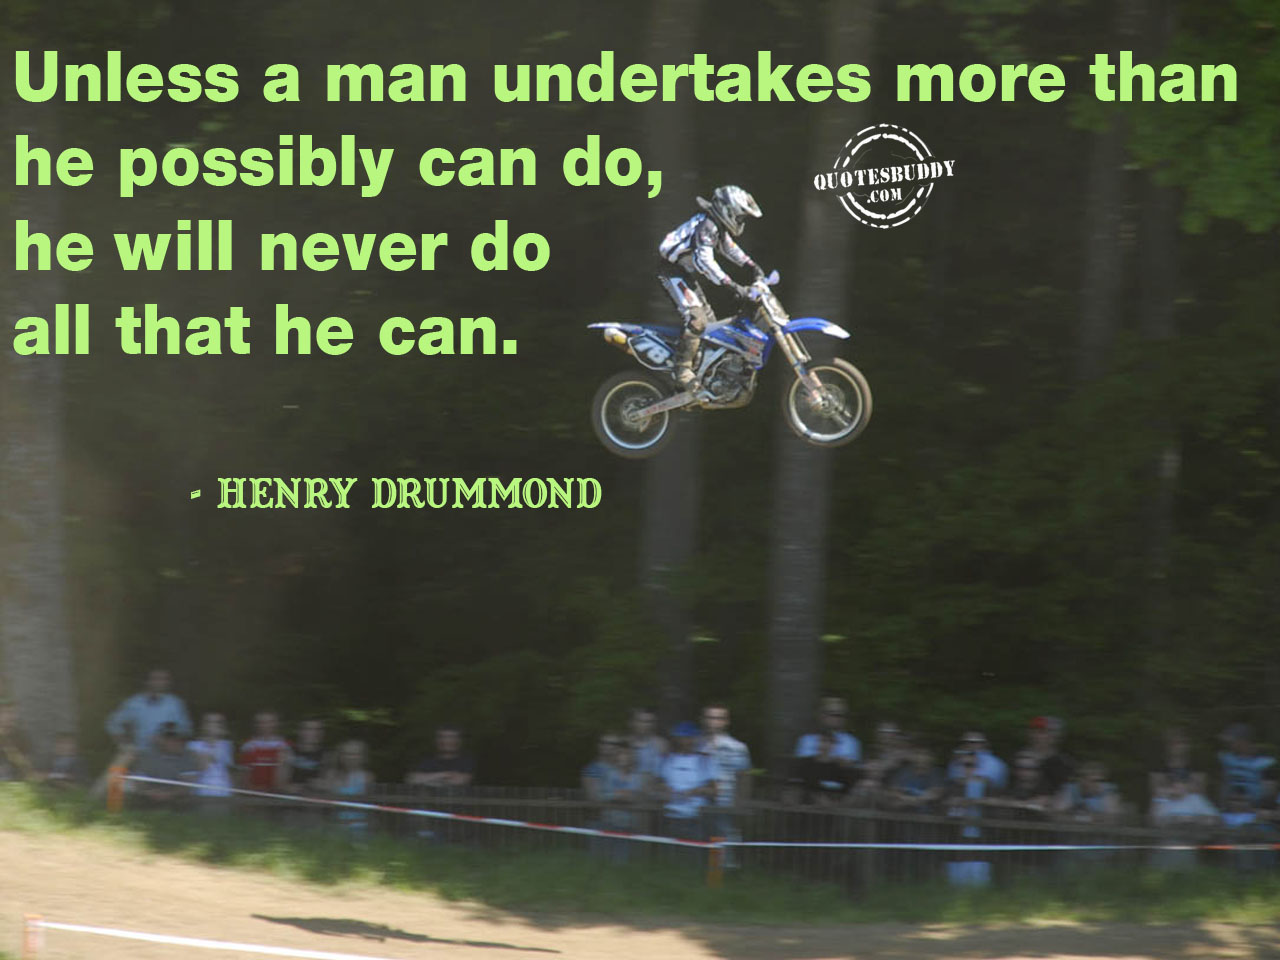 Unless a man undertakes more than he possibly can do, he will never do all he can do. - Henry Drummond